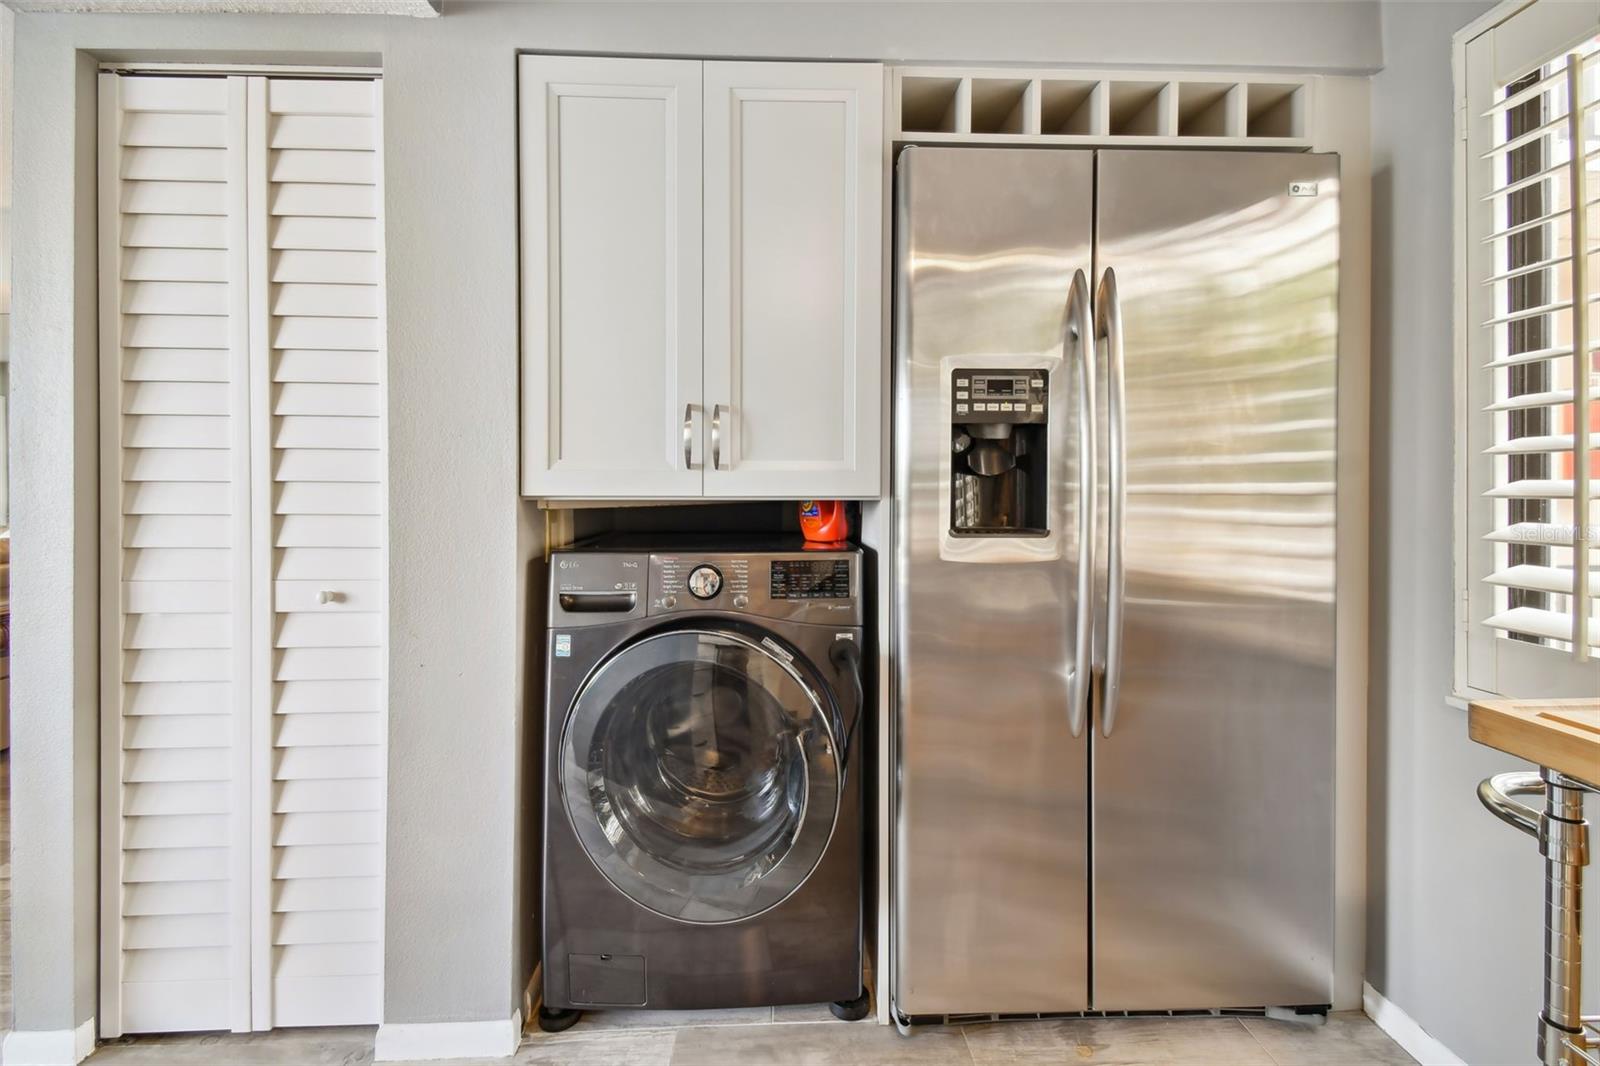 Washer/dryer is conveniently located in the kitchen